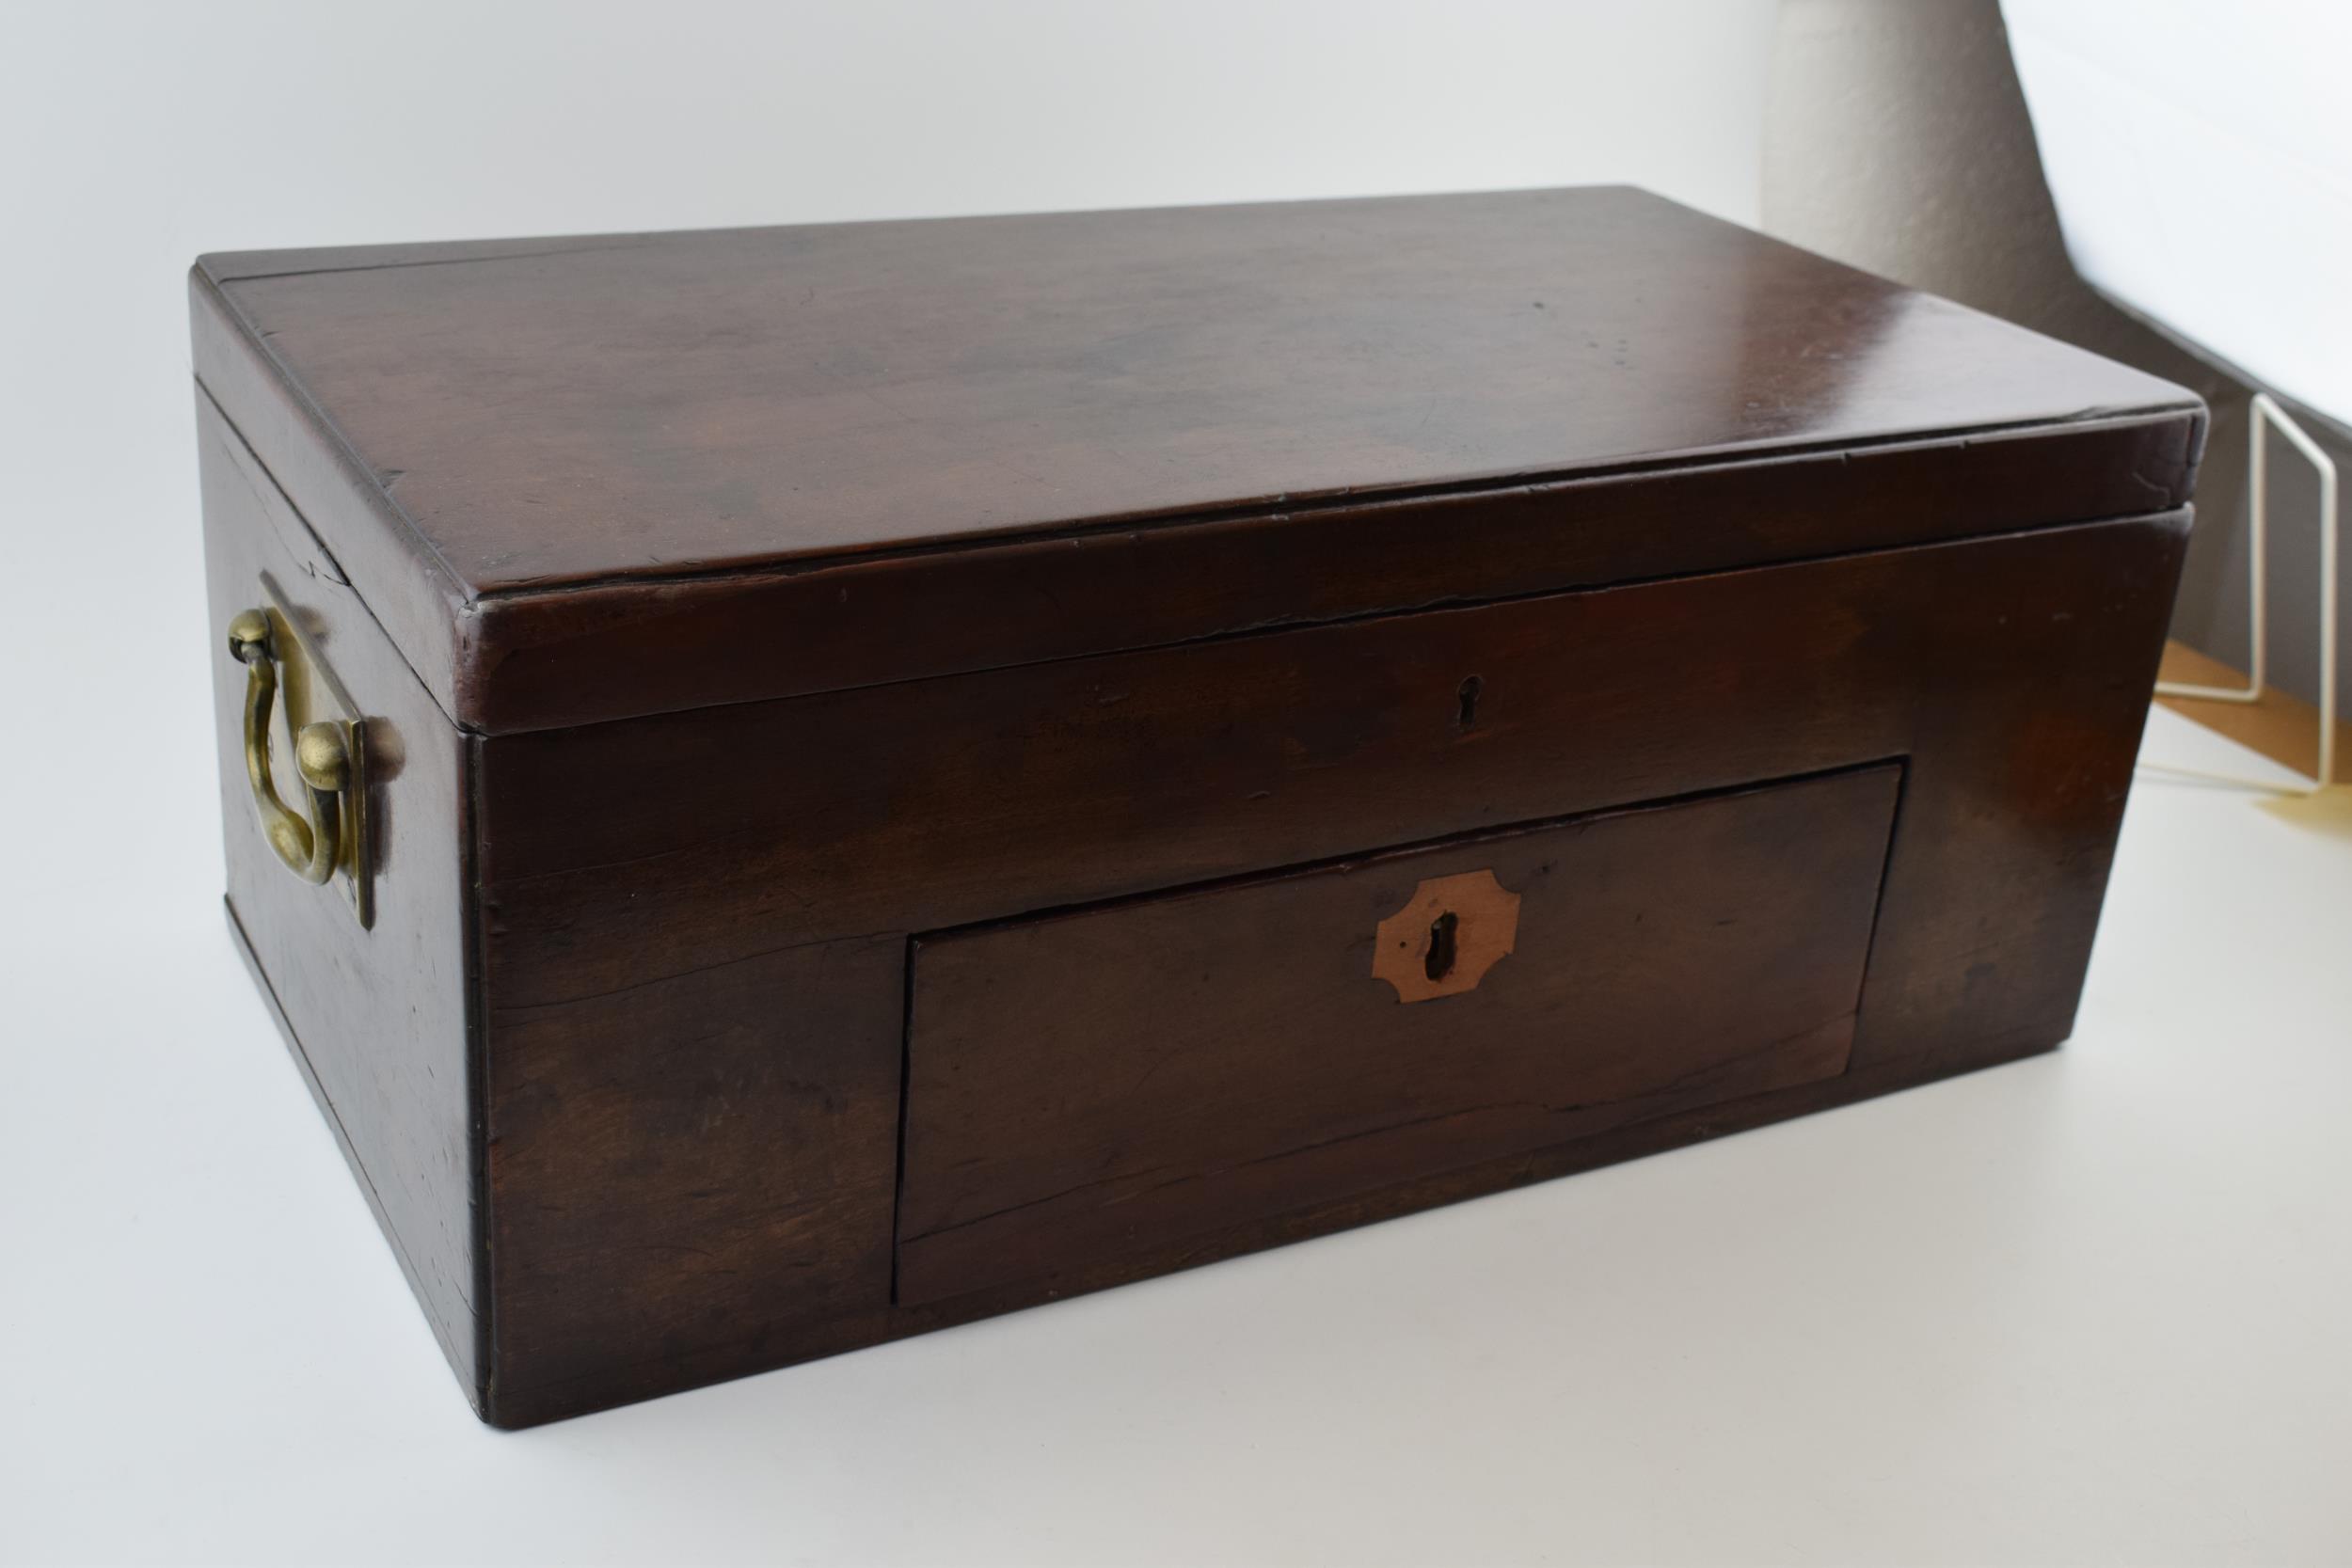 19th century mahogany apothecary box with fitted interior with space for 6 bottles, with brass - Image 2 of 5